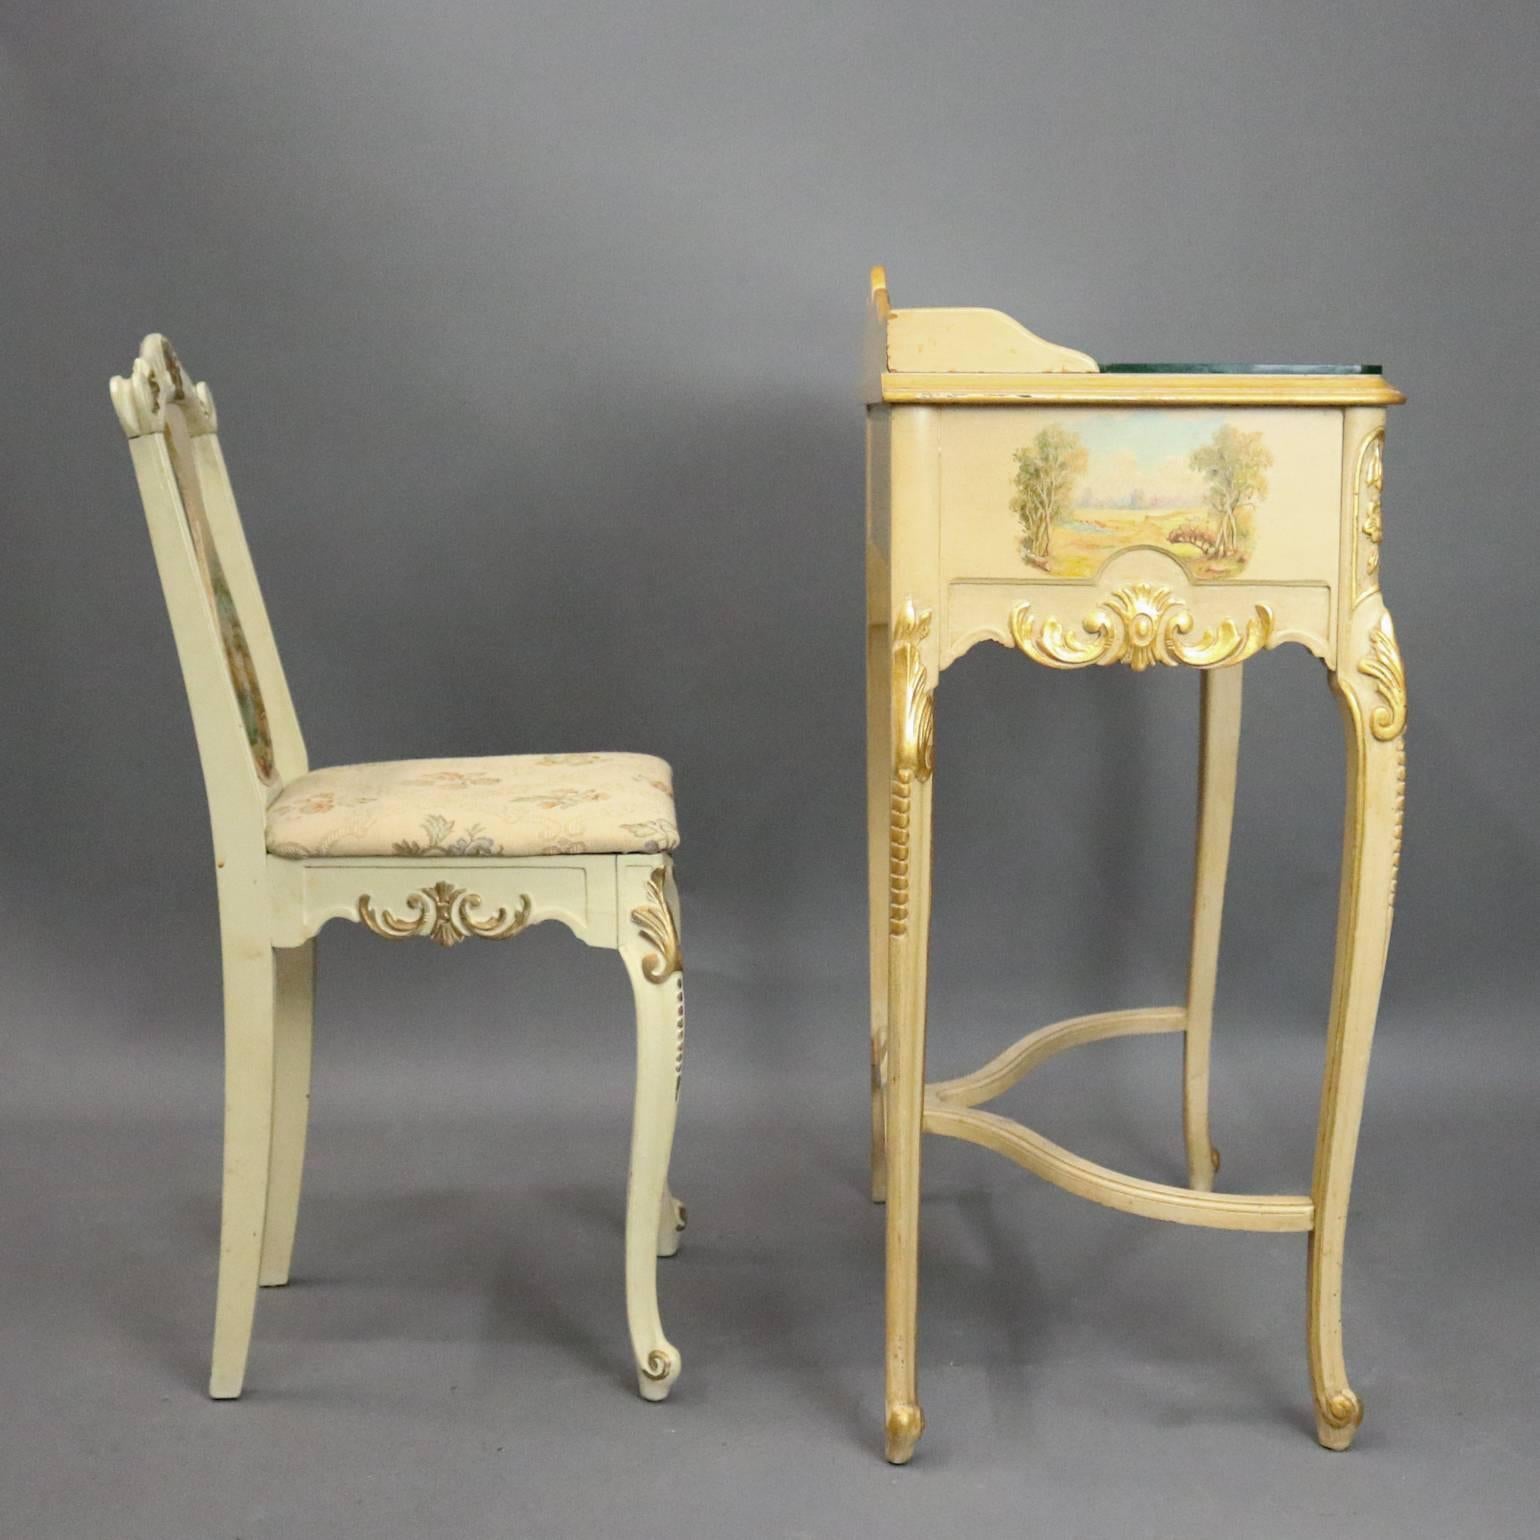 Antique French Provincial ladies desk features gilt decorated painted wood construction with gilt highlighted acanthus, shell and rosettes decoration, Vernis Martin hand-painted countryside scenes on top and sides with harbour scenes on matching